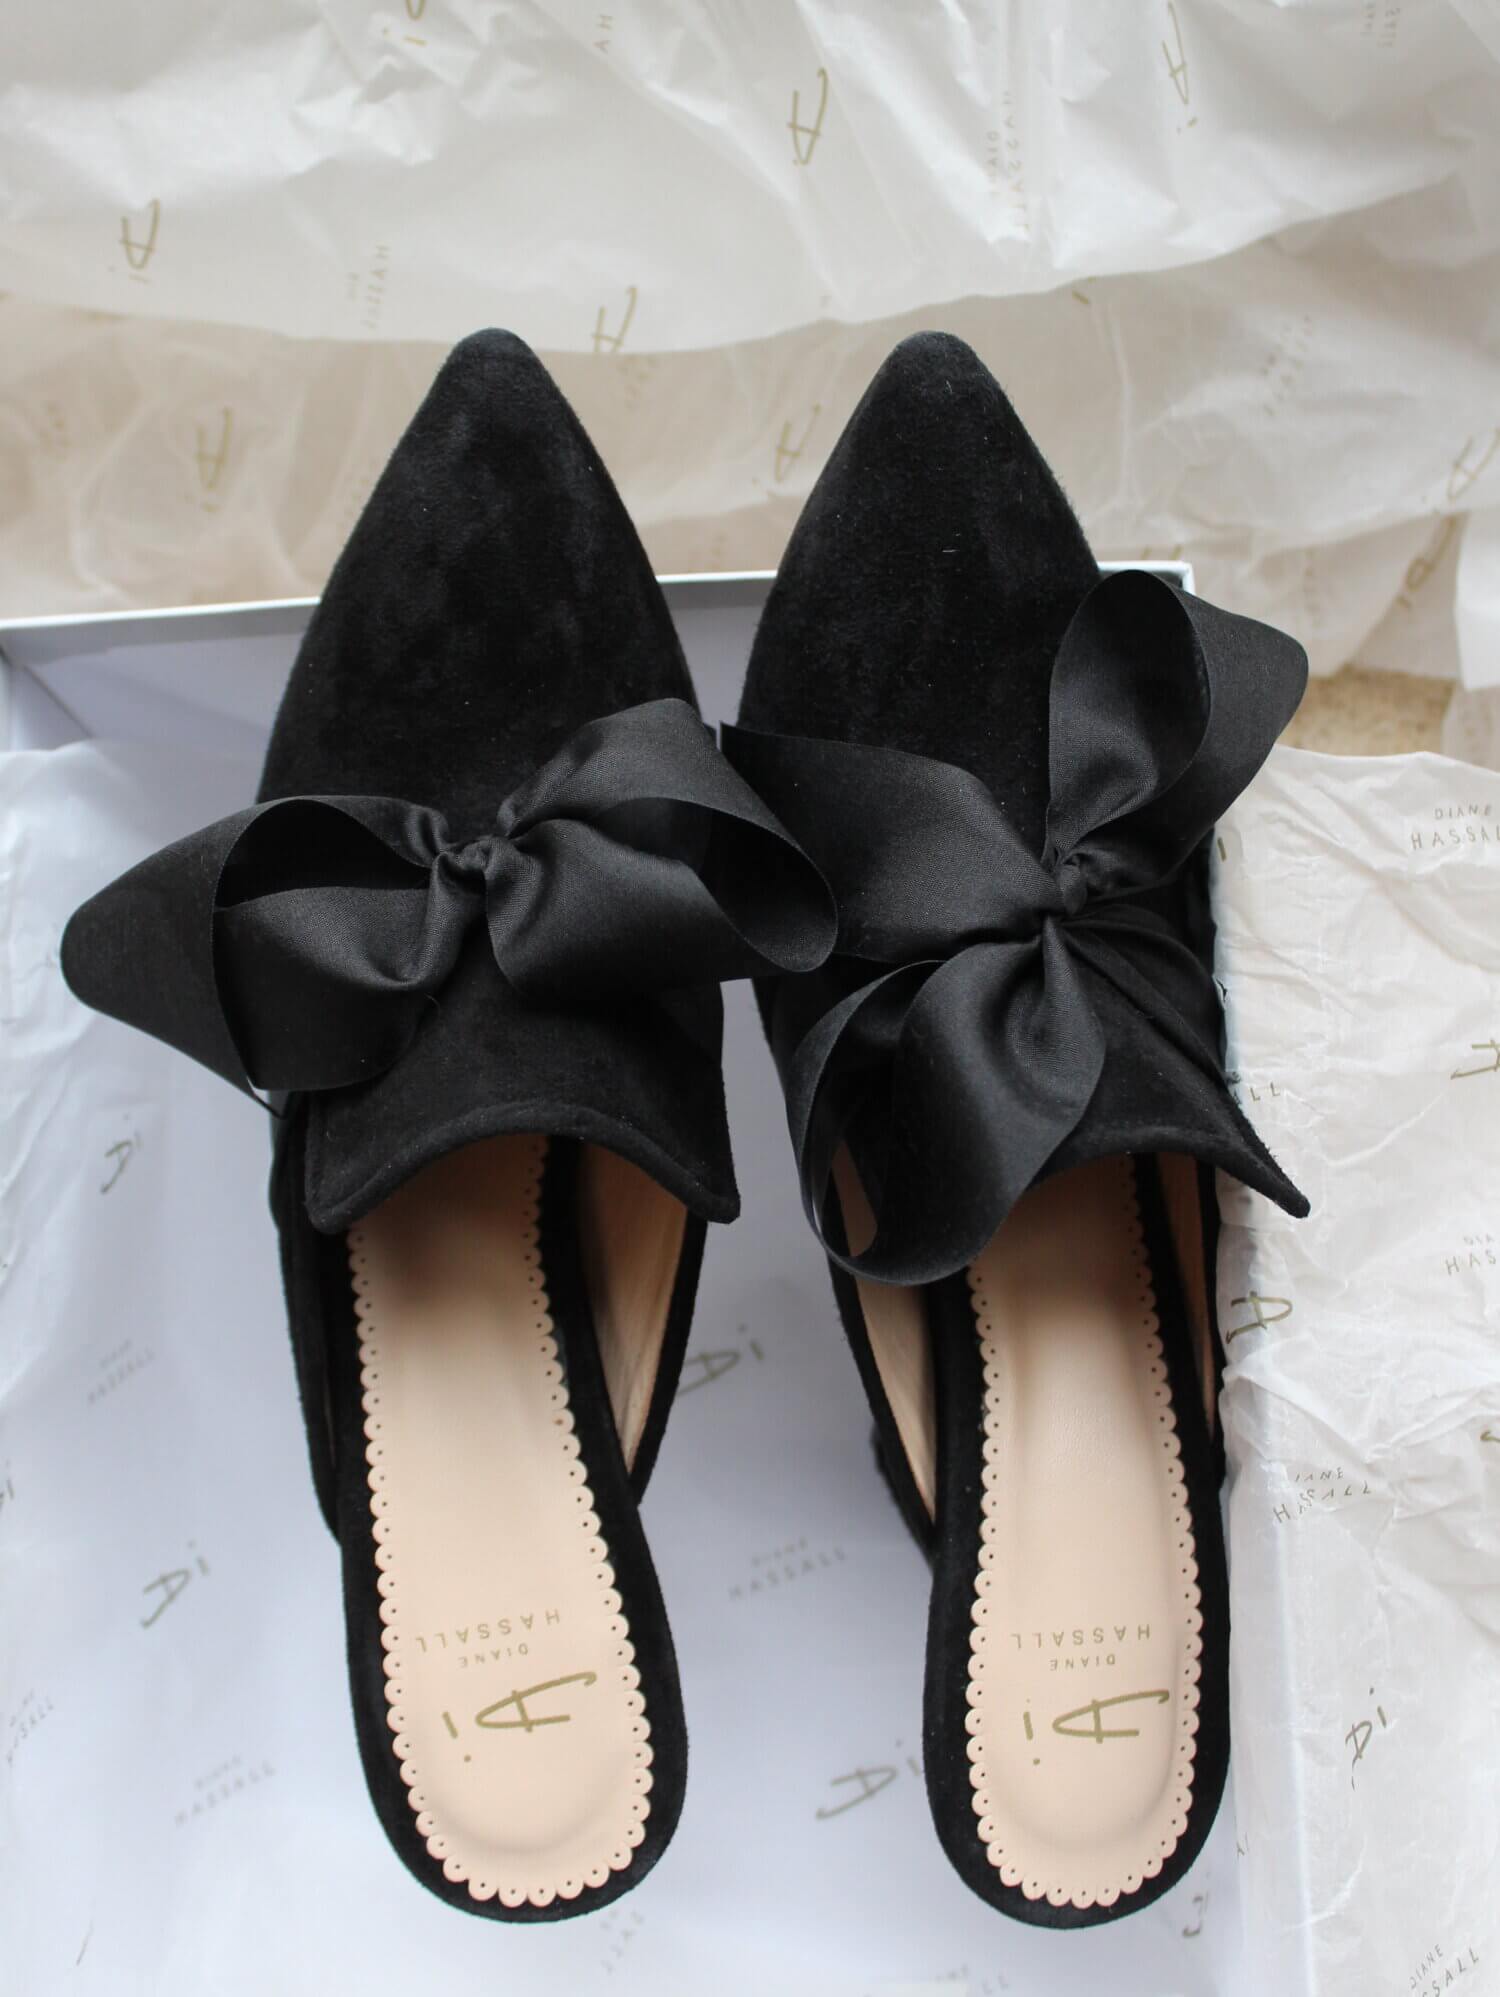 Cassis Black bridal mules. Wedding shoes handmade by Di Hassall.